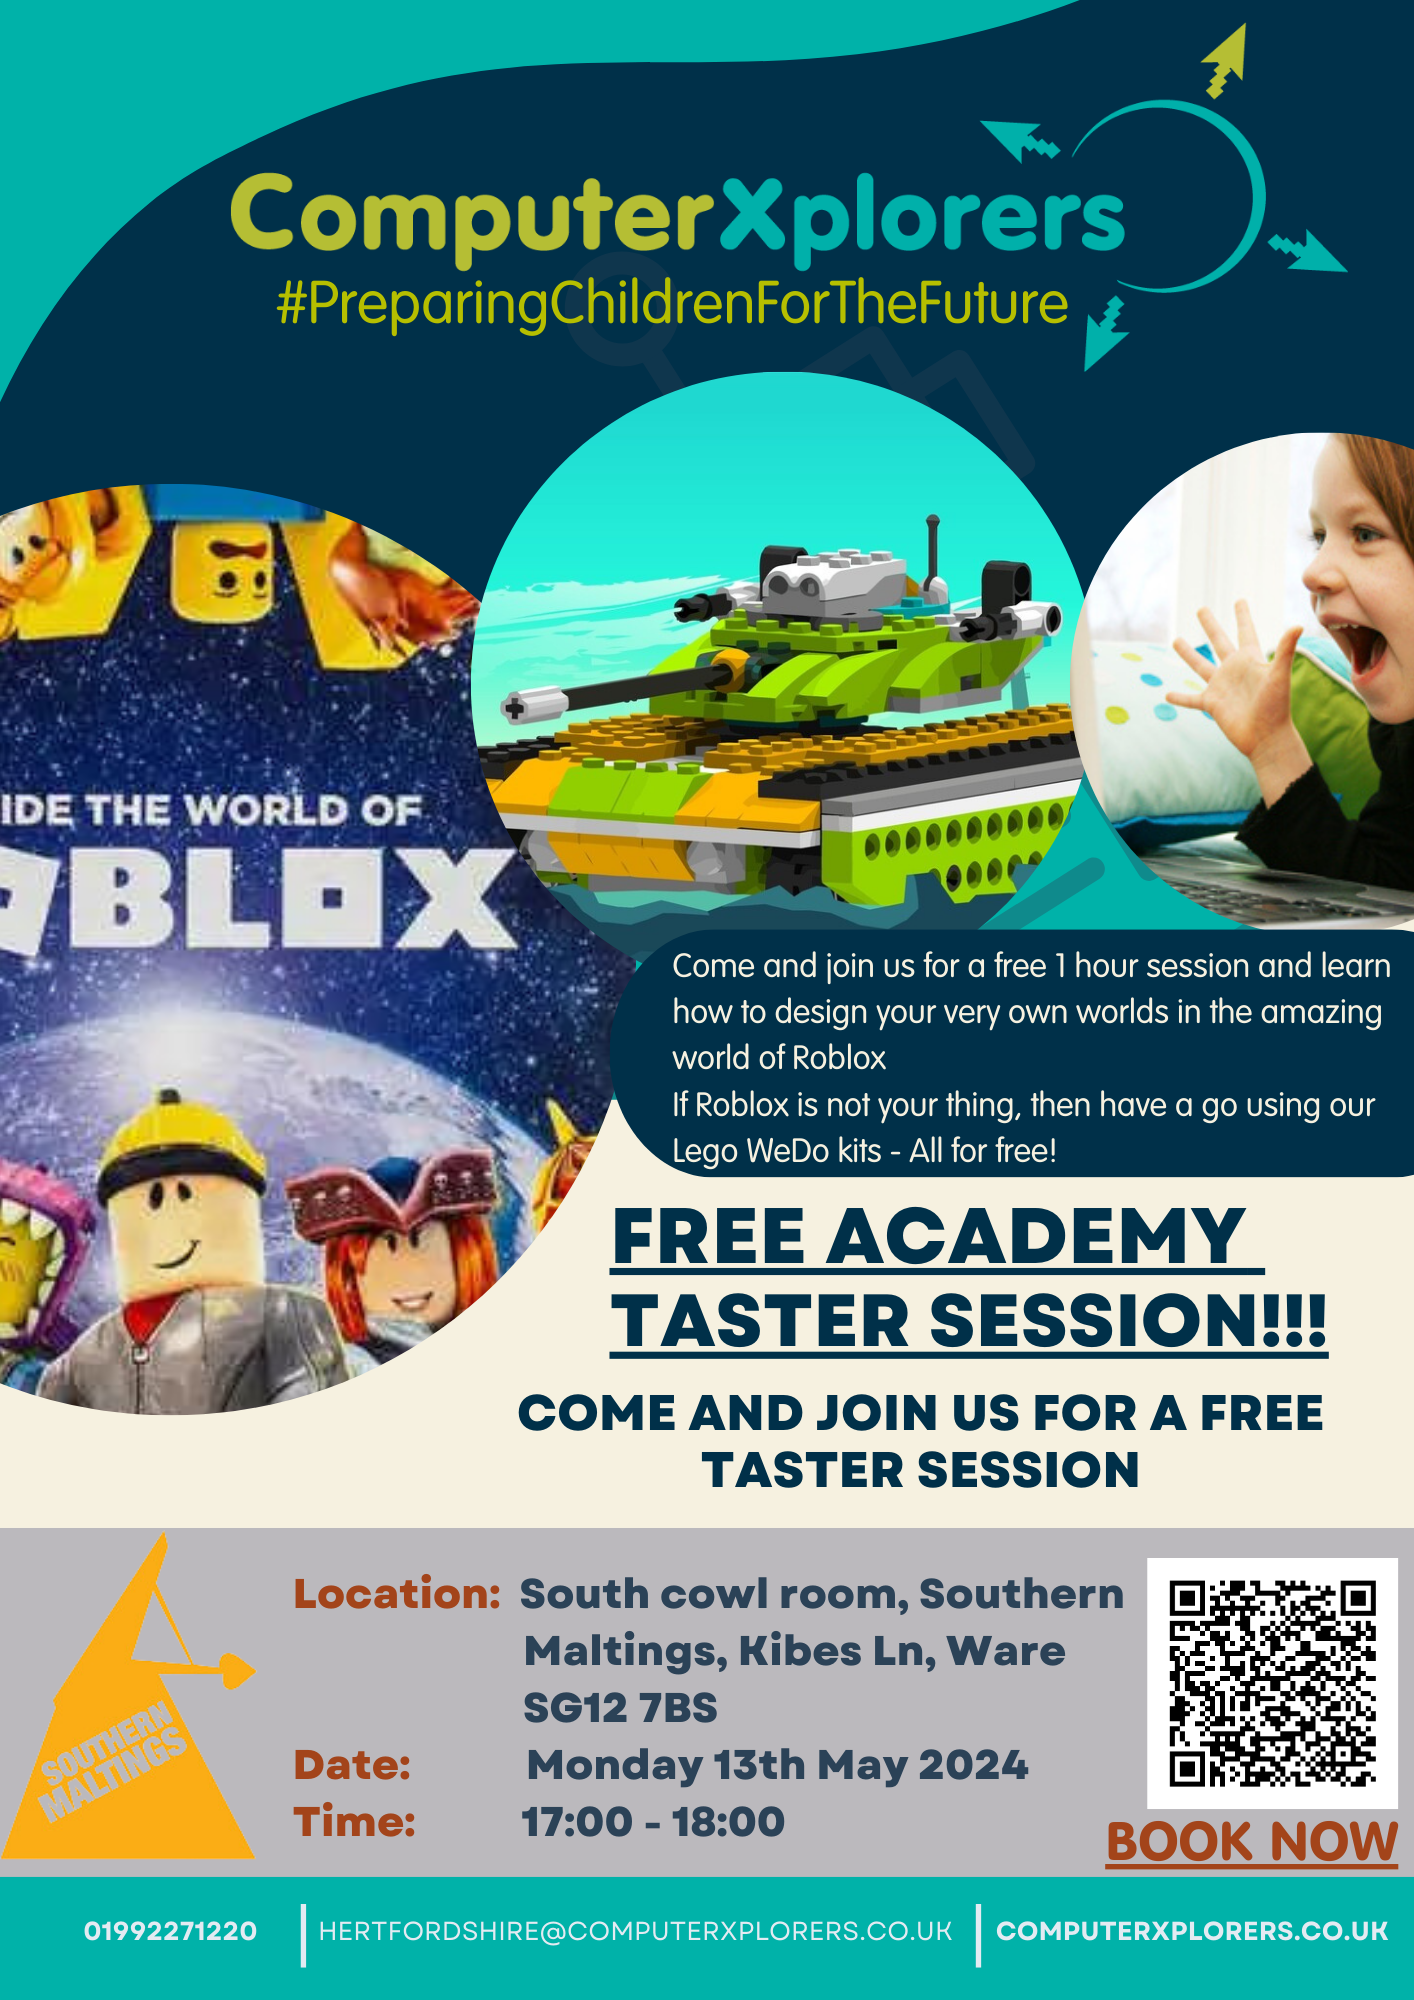 Monday Roblox and Lego Academy